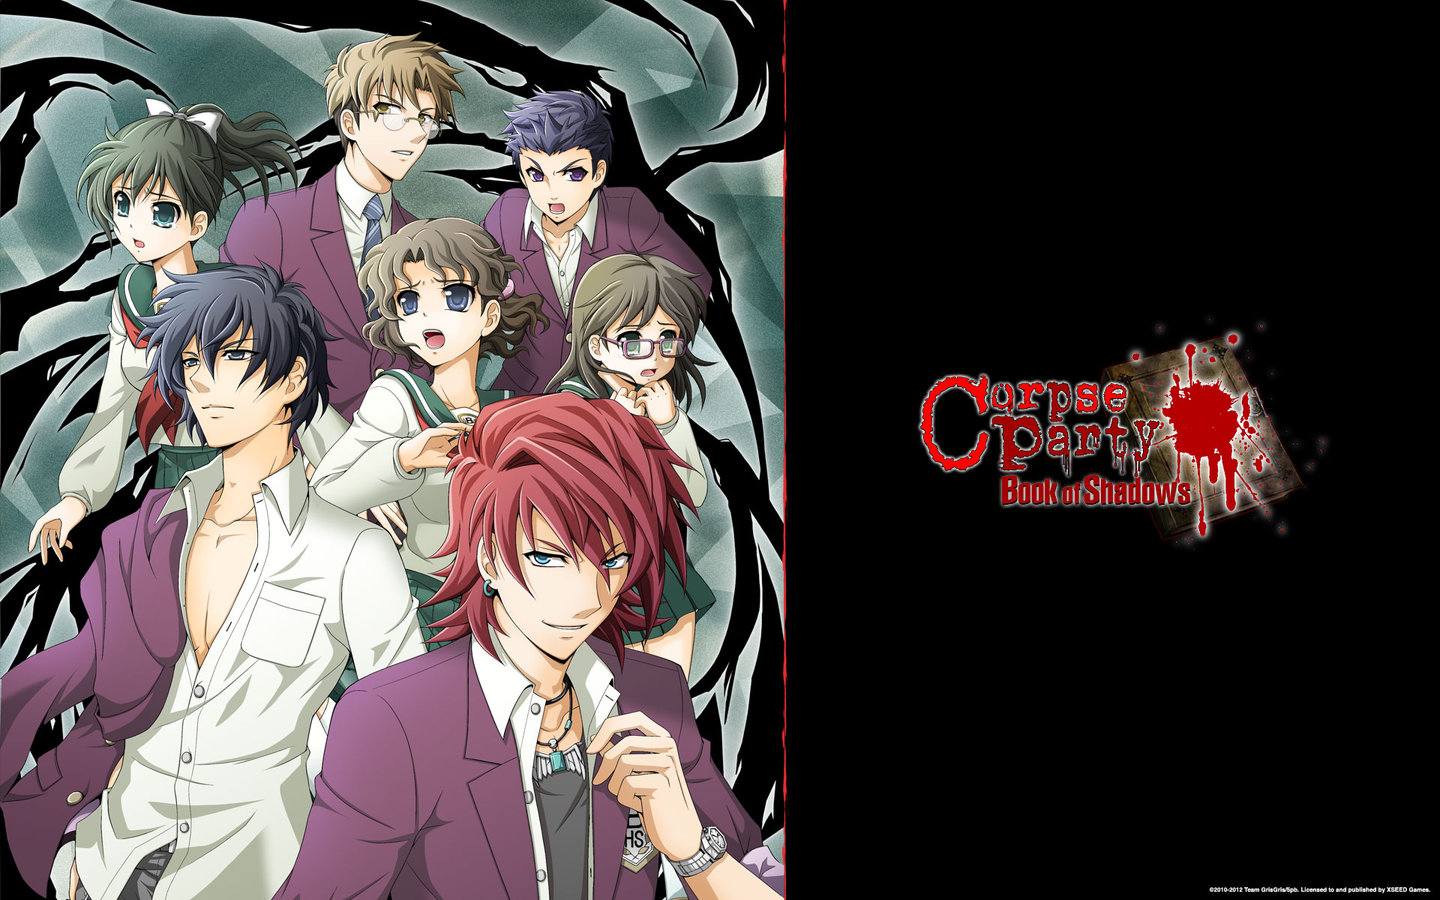 Corpse Party: Book of Shadows - PSP Wallpaper